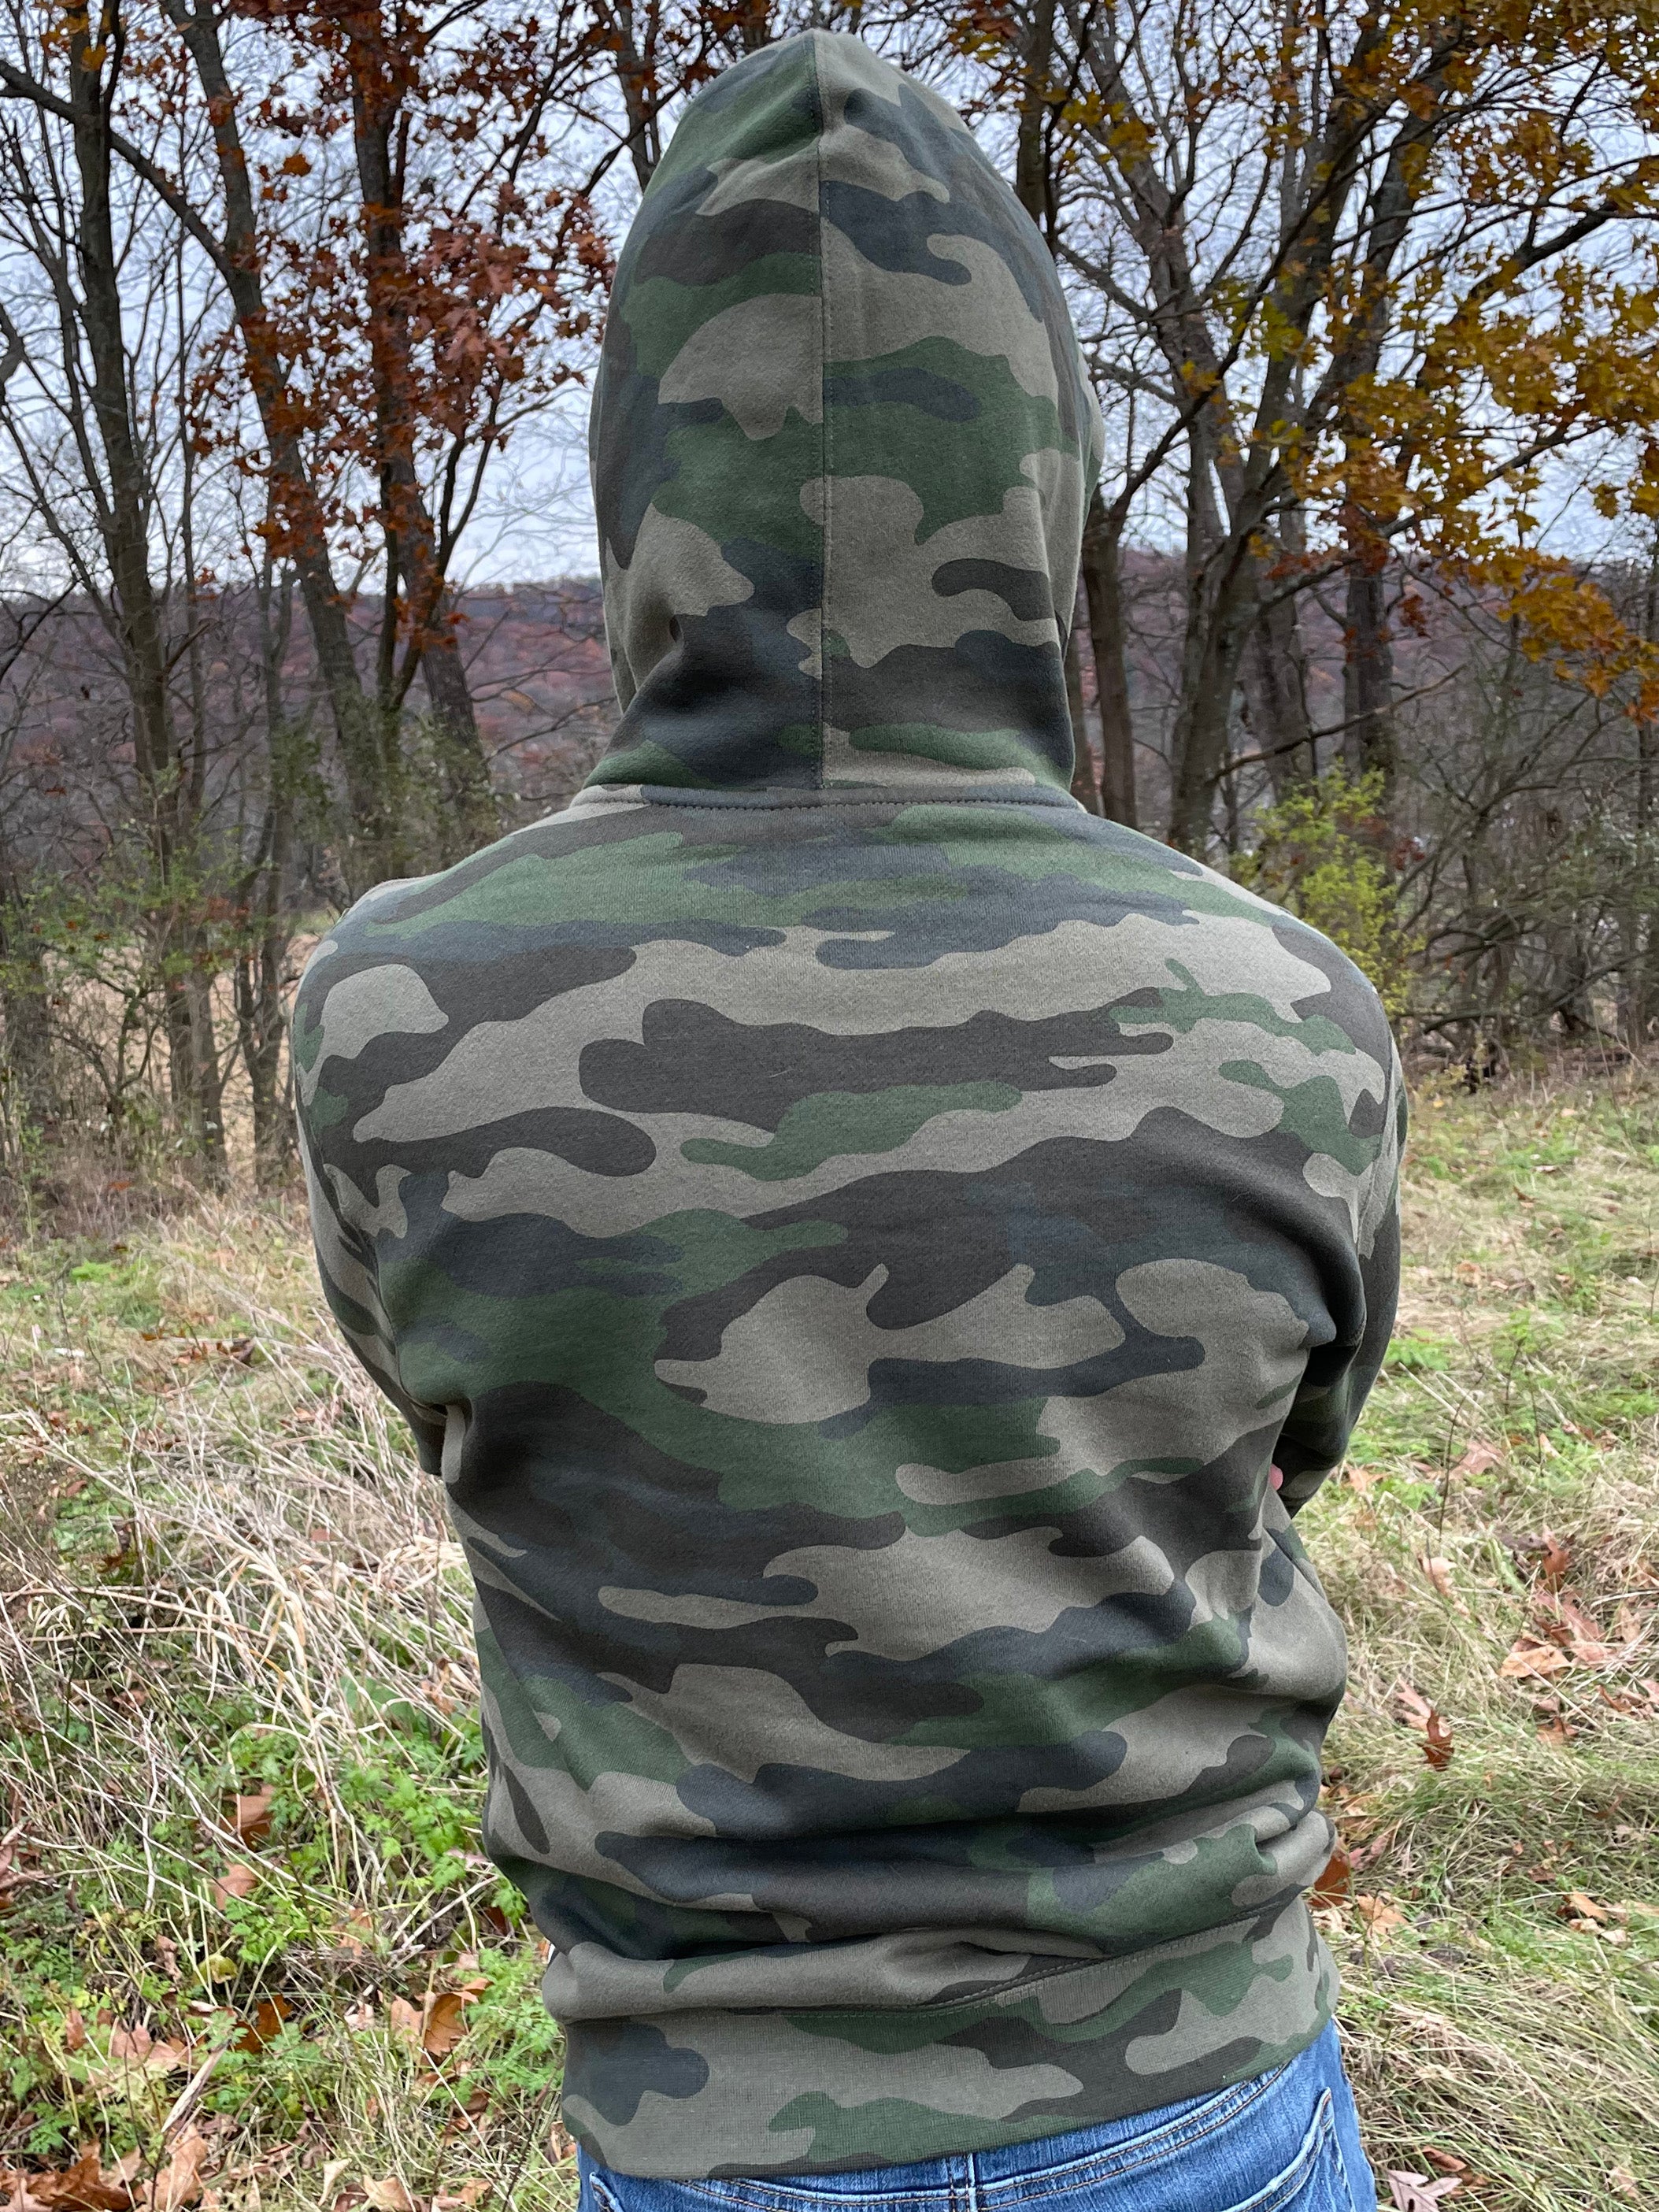 Camo With It Or On It Hoodie